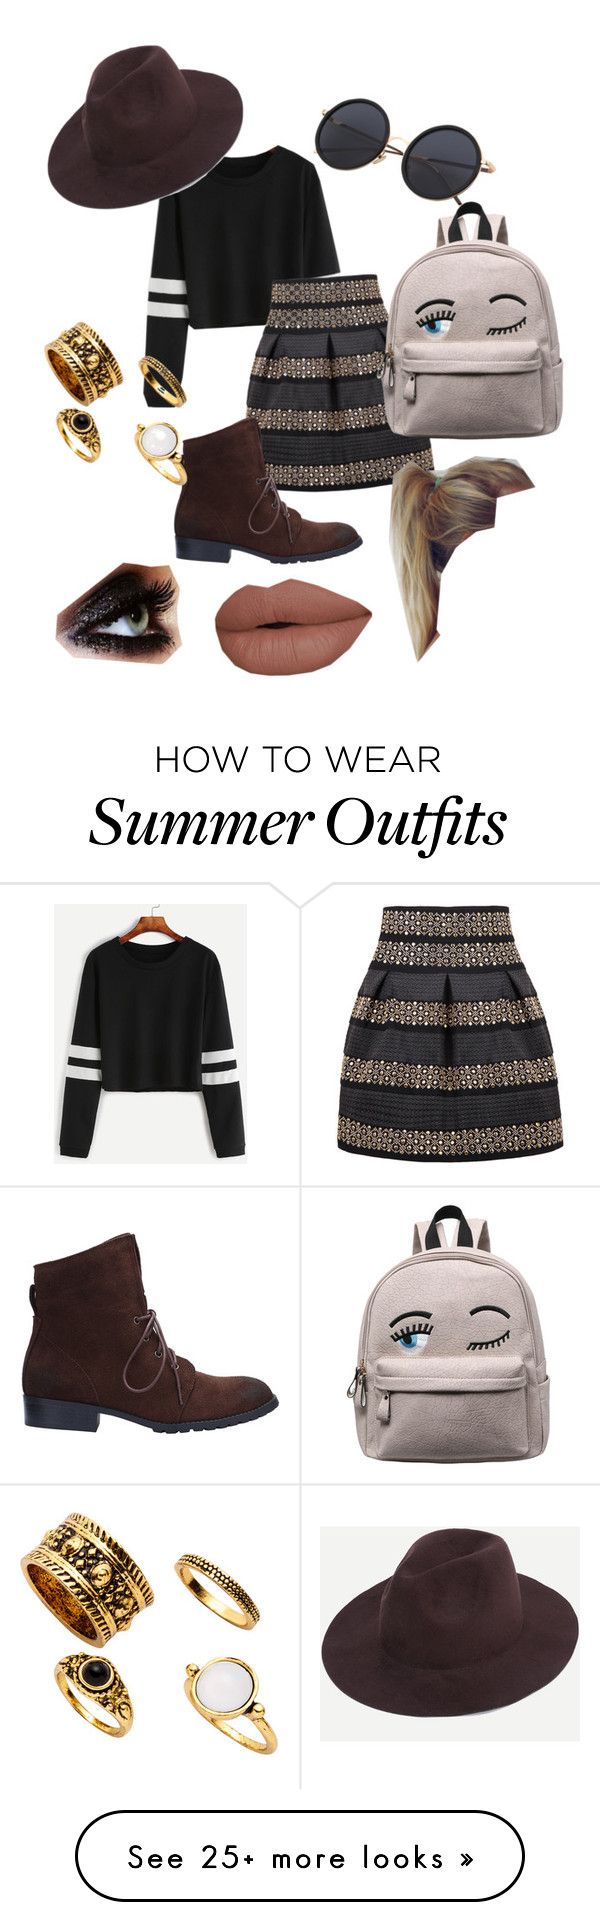 "Cute Summer School Hangout Outfit" by levoral on Polyvore...